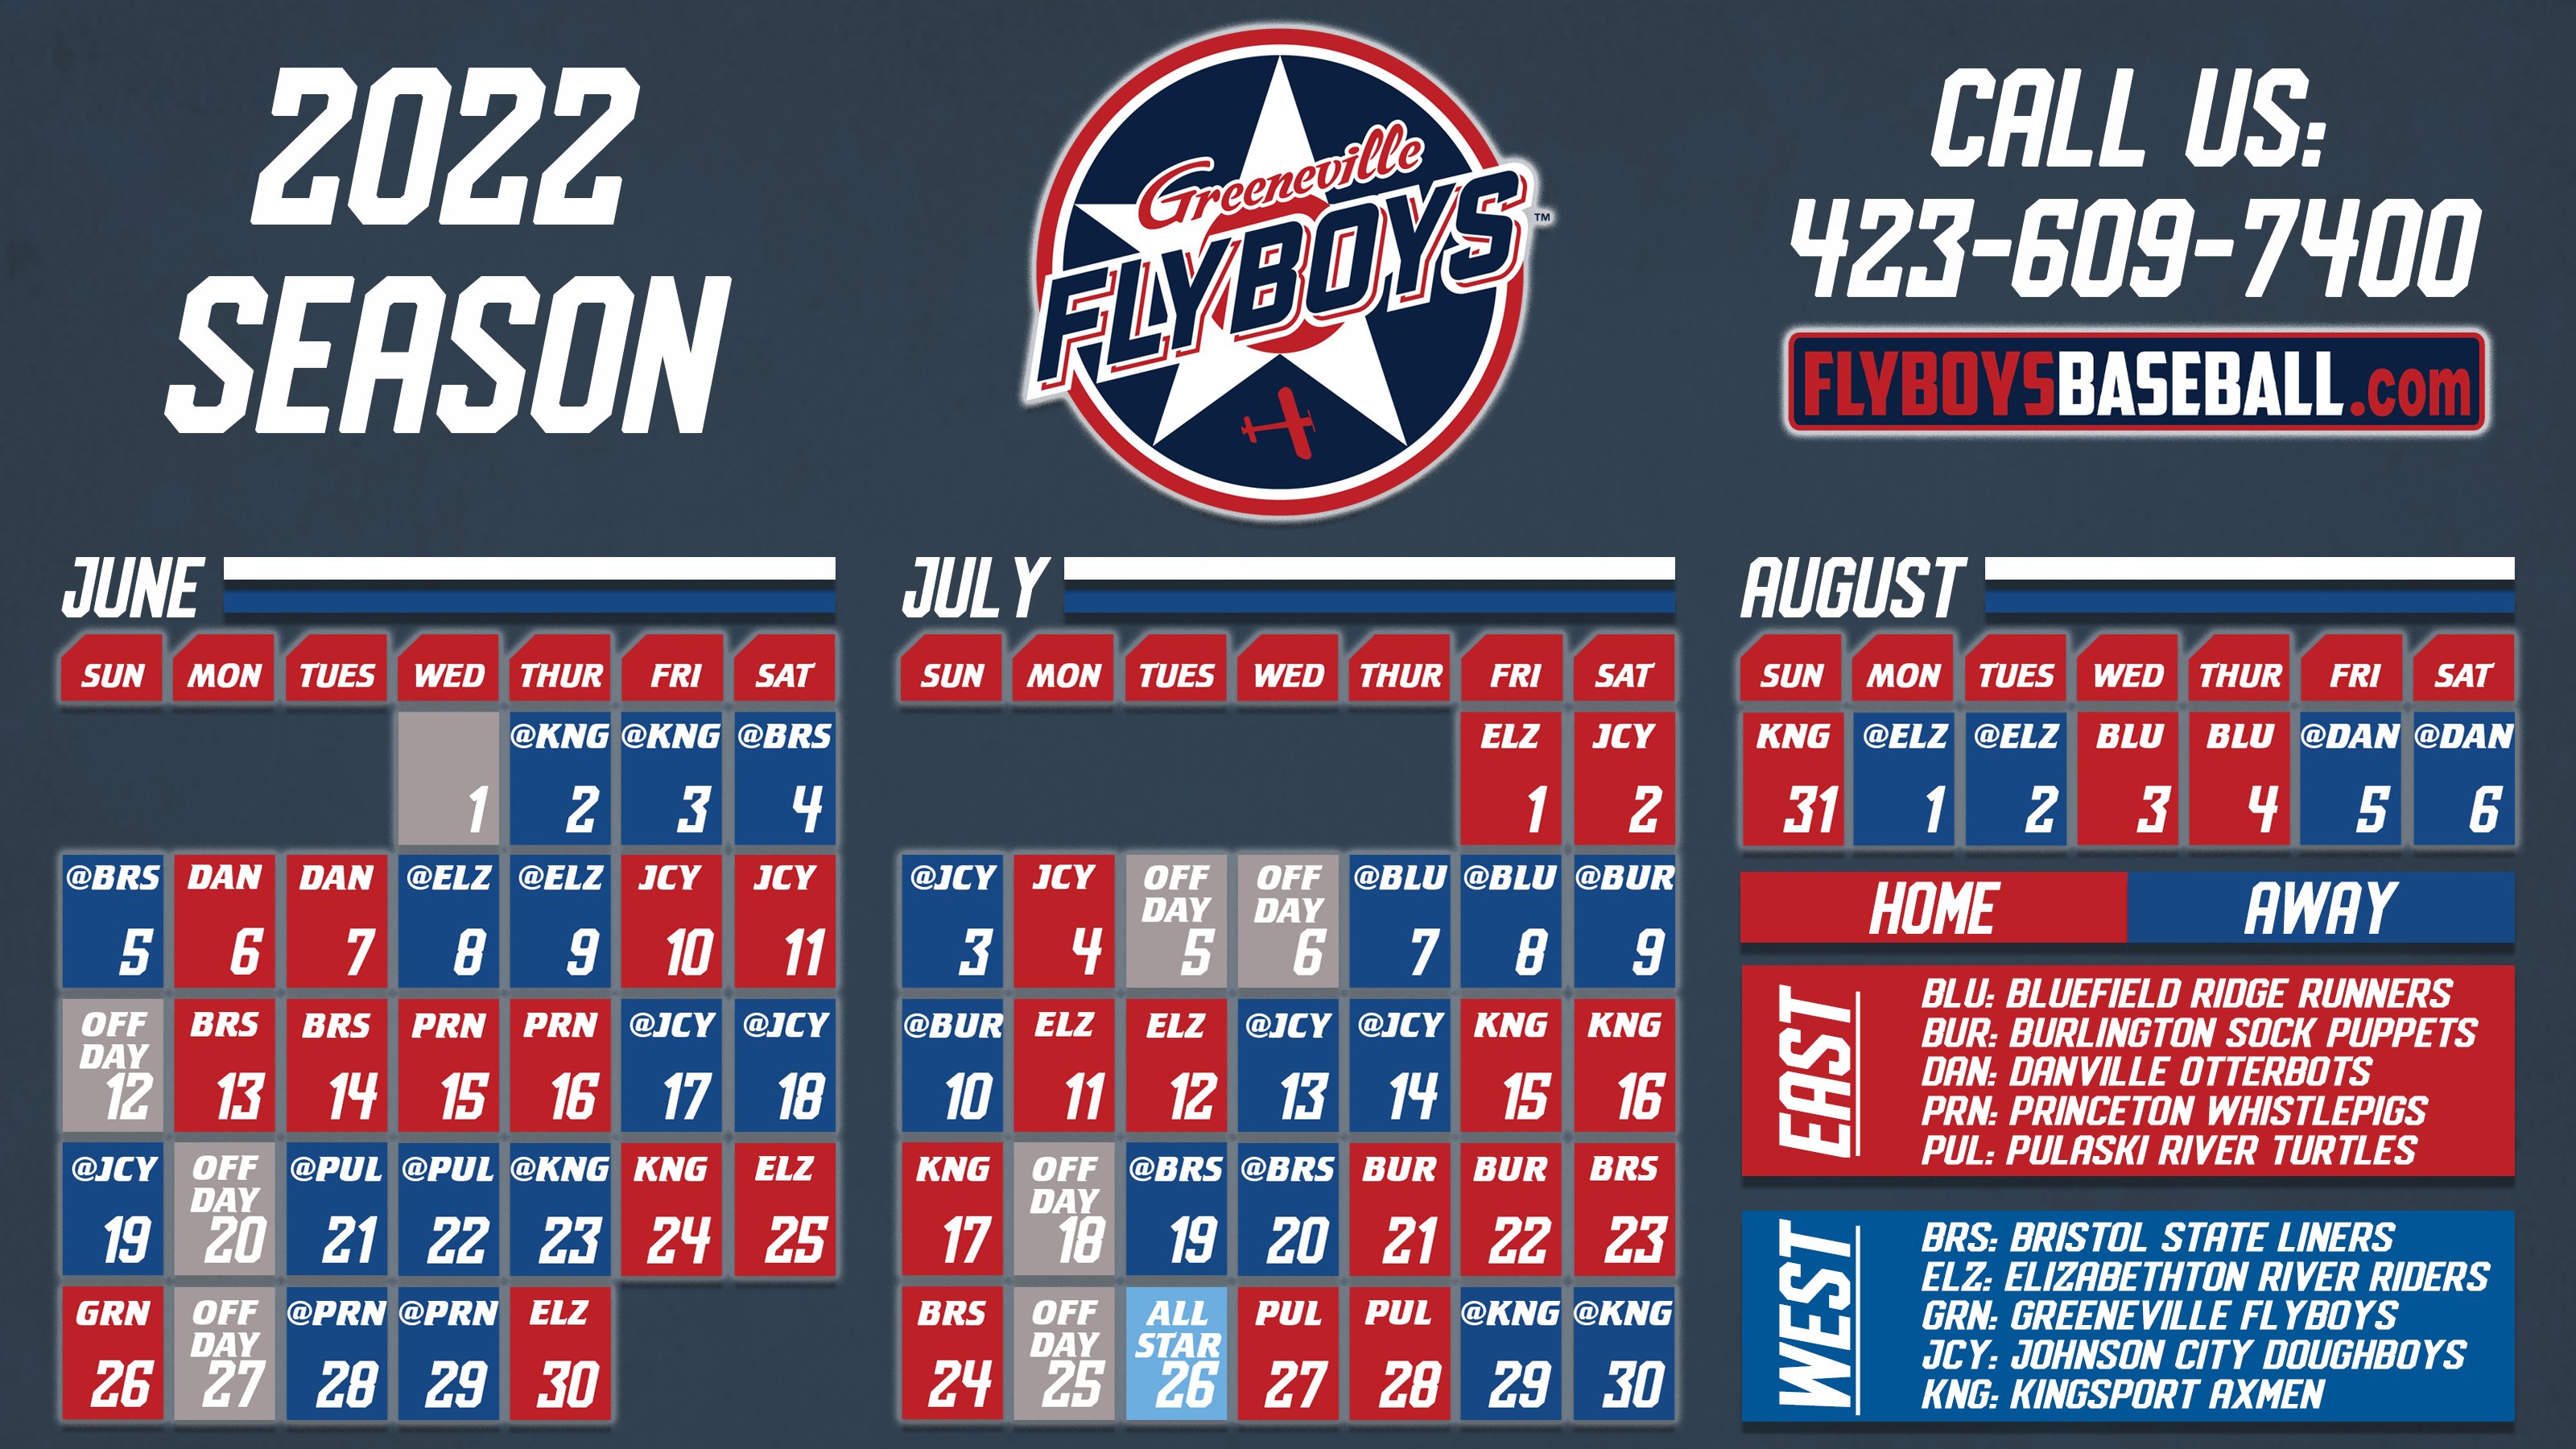 Nats 2022 Schedule Greeneville Flyboys On Twitter: "Exciting Day, Flyboys Fans! The 2022  Schedule Is Officially Released! It Will Be Available On The Website  Shortly. Can't Wait To See You All In 2022 As We